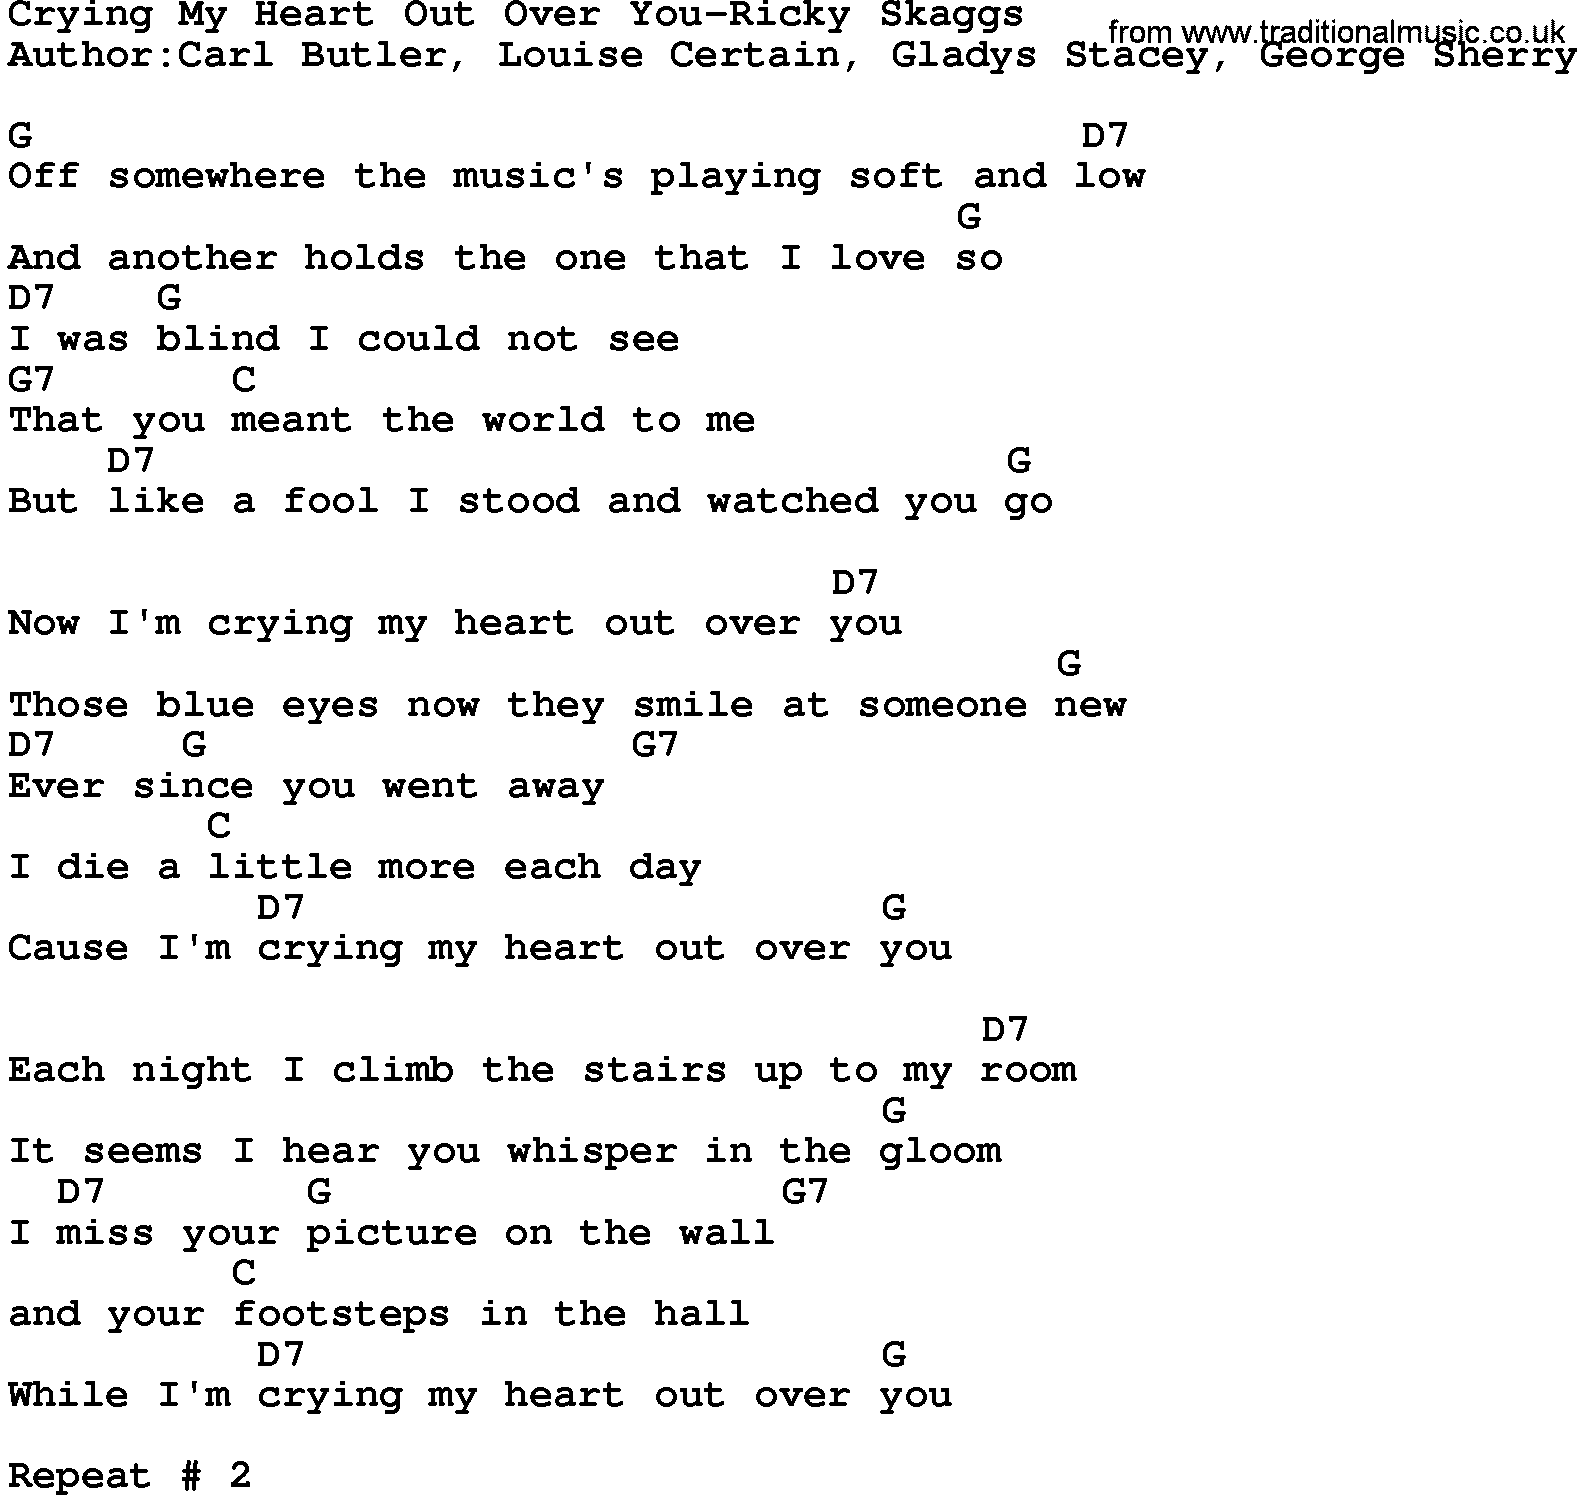 Country music song: Crying My Heart Out Over You-Ricky Skaggs lyrics and chords